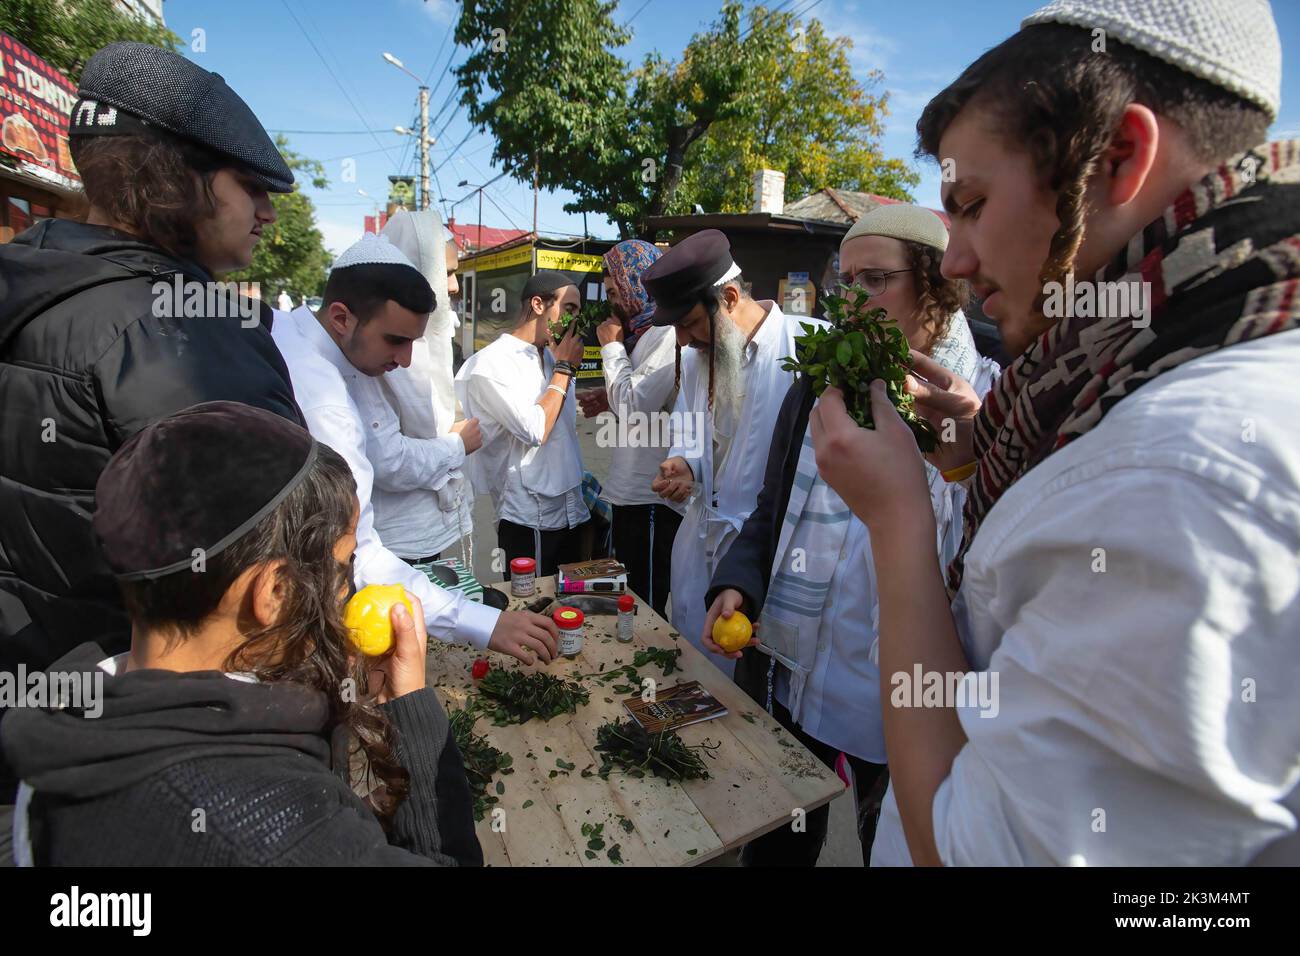 Uman, Ukraine. 26th Sep, 2022. Ultra-Orthodox Jewish pilgrims perform rituals during the celebration of the Rosh Hashanah holiday, the Jewish New Year in Uman. Every year, thousands of Orthodox Bratslav Hasidic Jews from different countries gather in Uman to mark Rosh Hashanah, Jewish New Year, near the tomb of Rabbi Nachman, a great-grandson of the founder of Hasidism. Credit: SOPA Images Limited/Alamy Live News Stock Photo